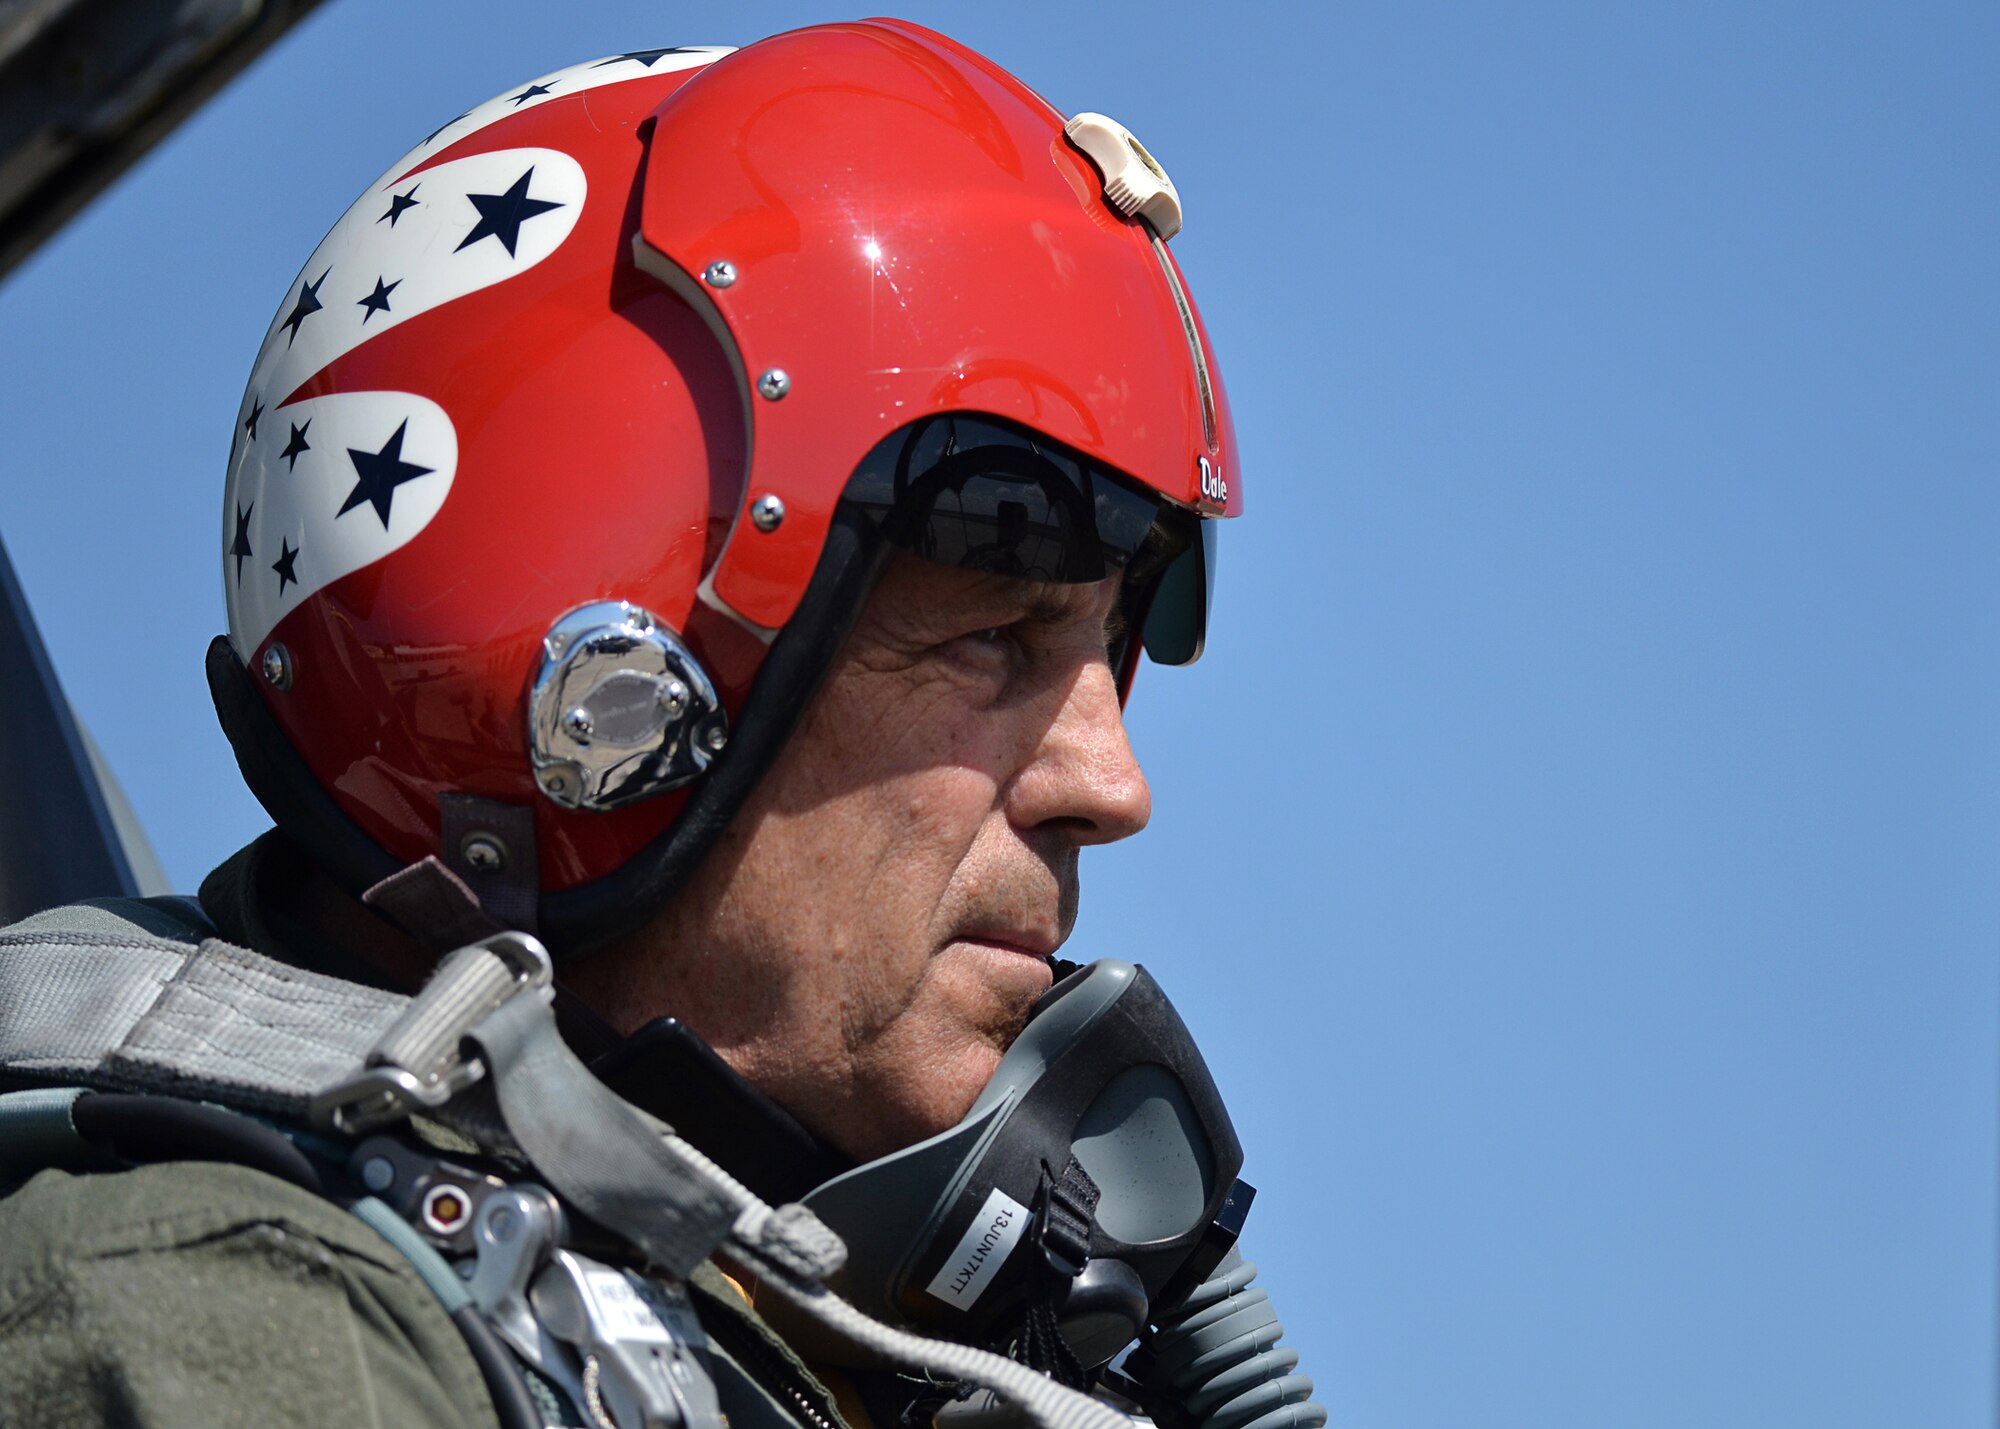 Retired U.S. Air Force Lt. Col. Dale Cooke, former Thunderbirds slot position pilot, prepares for a historic flight in the original unmodified T-38A model used during his service with the USAF Thunderbirds in the early 80s nationwide at Tyndall Air Force Base, Fla., April 21, 2017. Cooke and Slot Machine logged over 800 flight hours at 200 performances across the country. Slot Machine is the last T-38A model still in service with the 2nd Fighter Training Squadron at Tyndall and is used as a venerable air aggressor for F-22 Raptor student pilots. (U.S. Air Force photo by Tech. Sgt. Javier Cruz/ Released)  